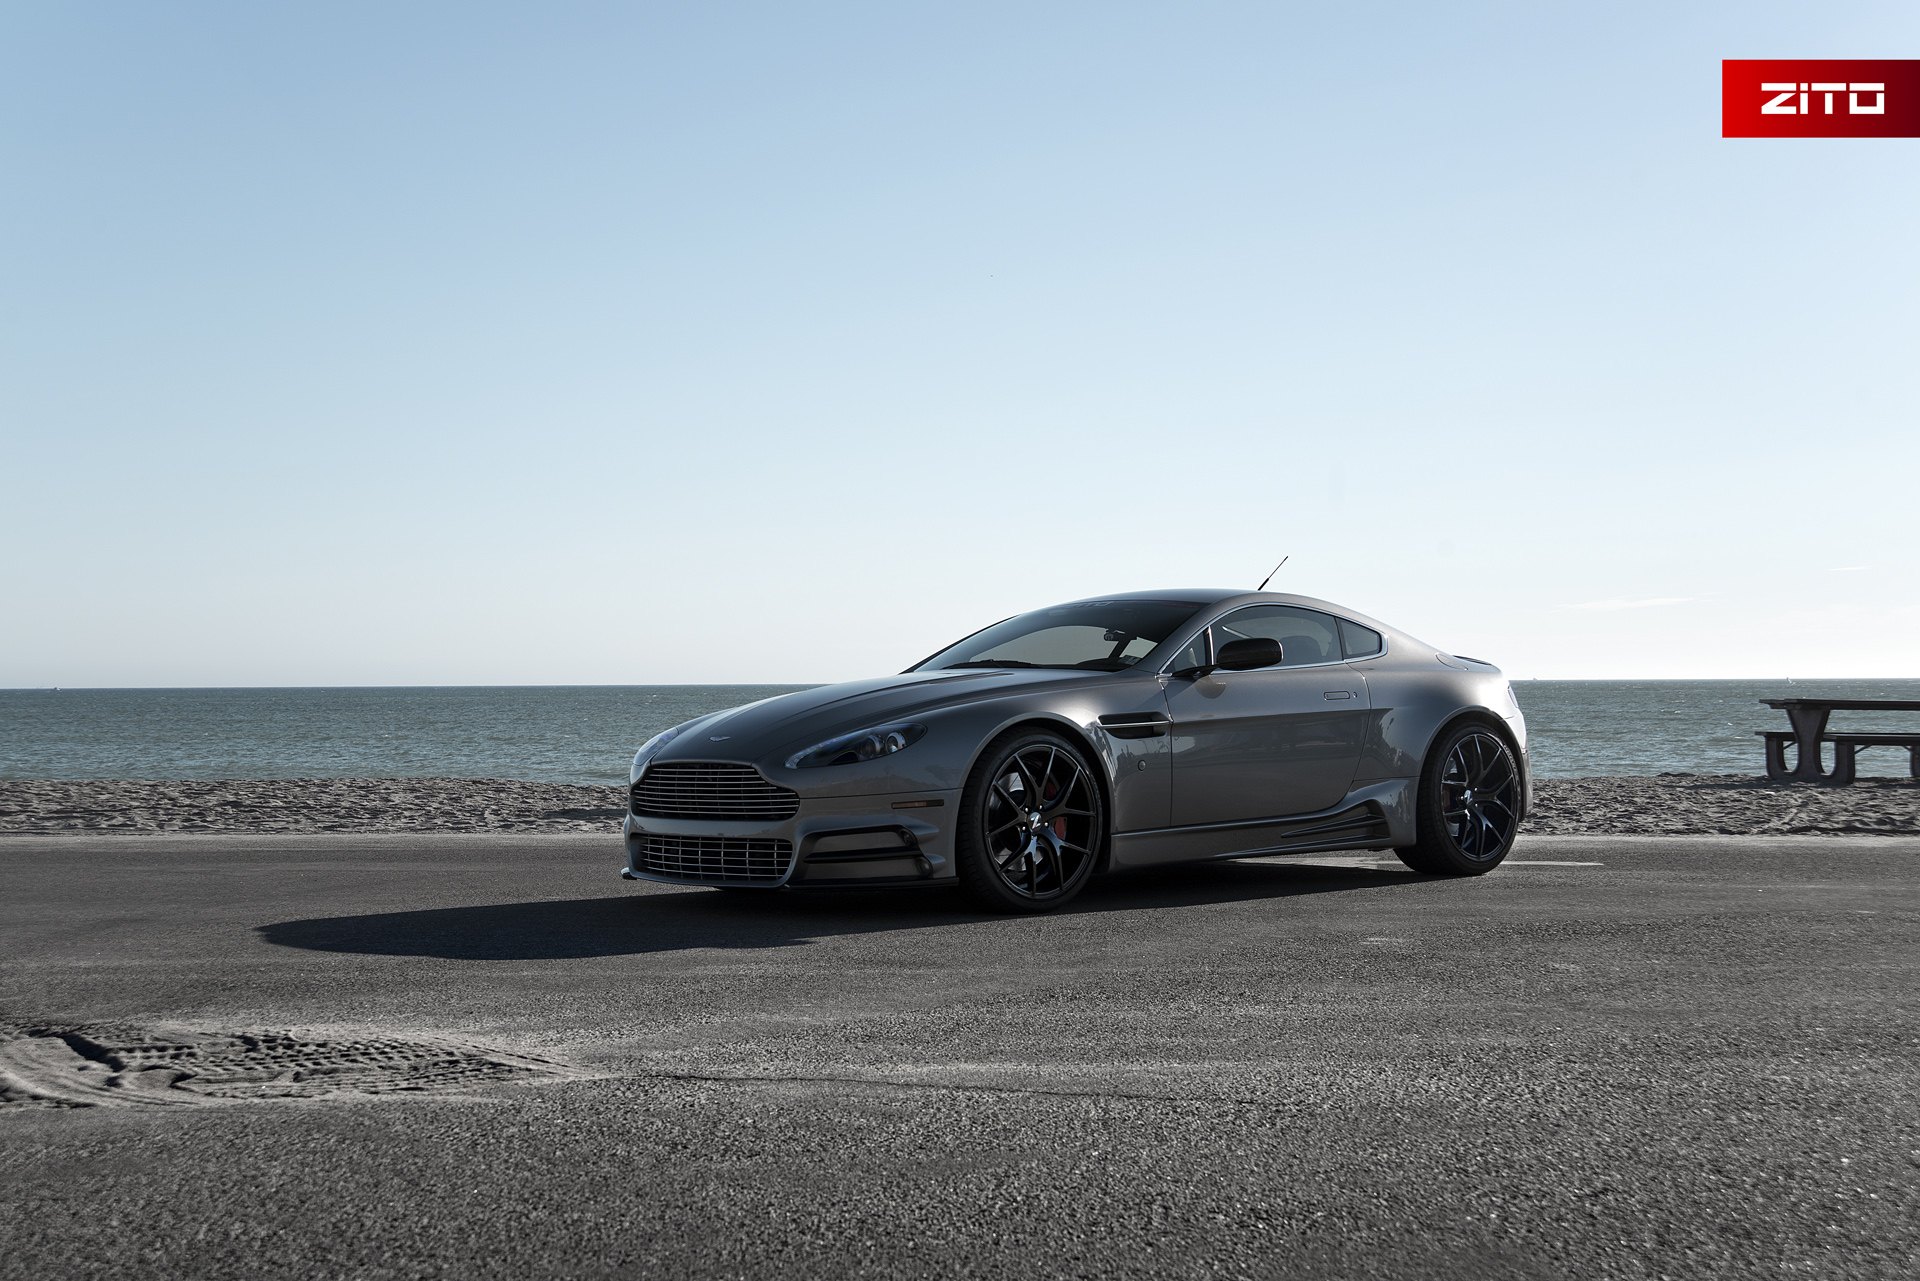 Gray Aston Martin Vantage with Custom Billet Grille - Photo by Zito Wheels